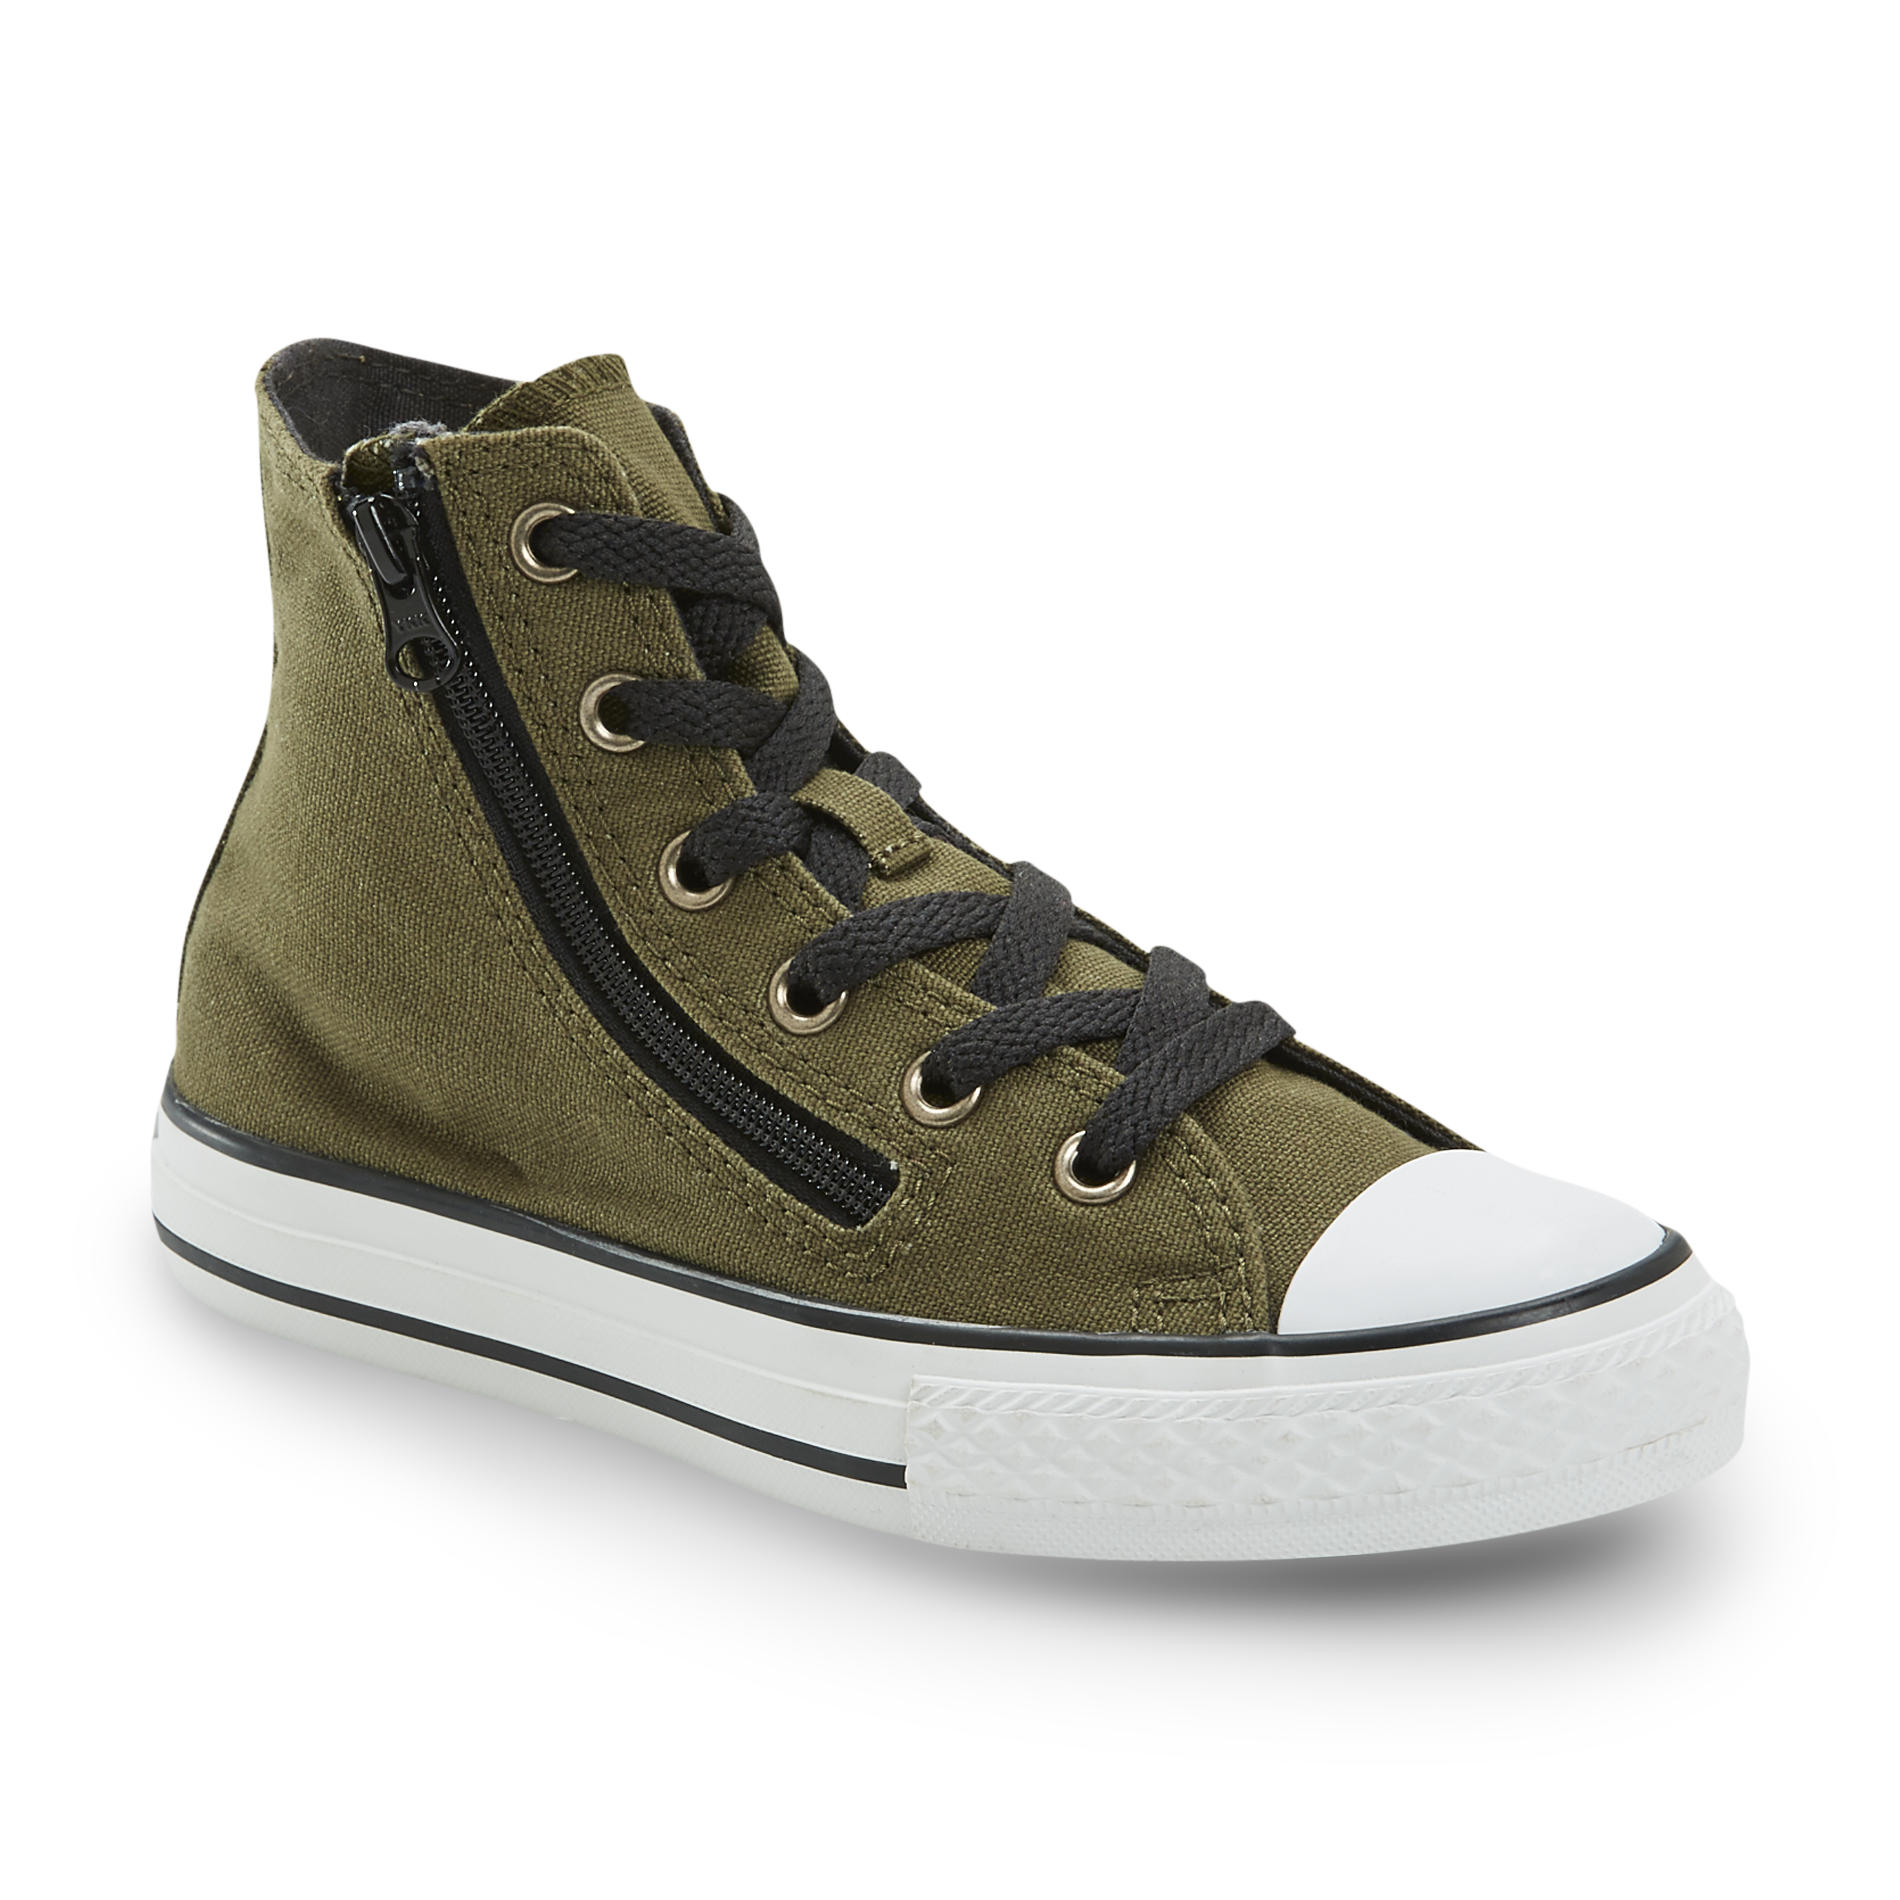 Converse Chuck Taylor All Star Youth's Dark Green Double-Zip High-Top Sneaker